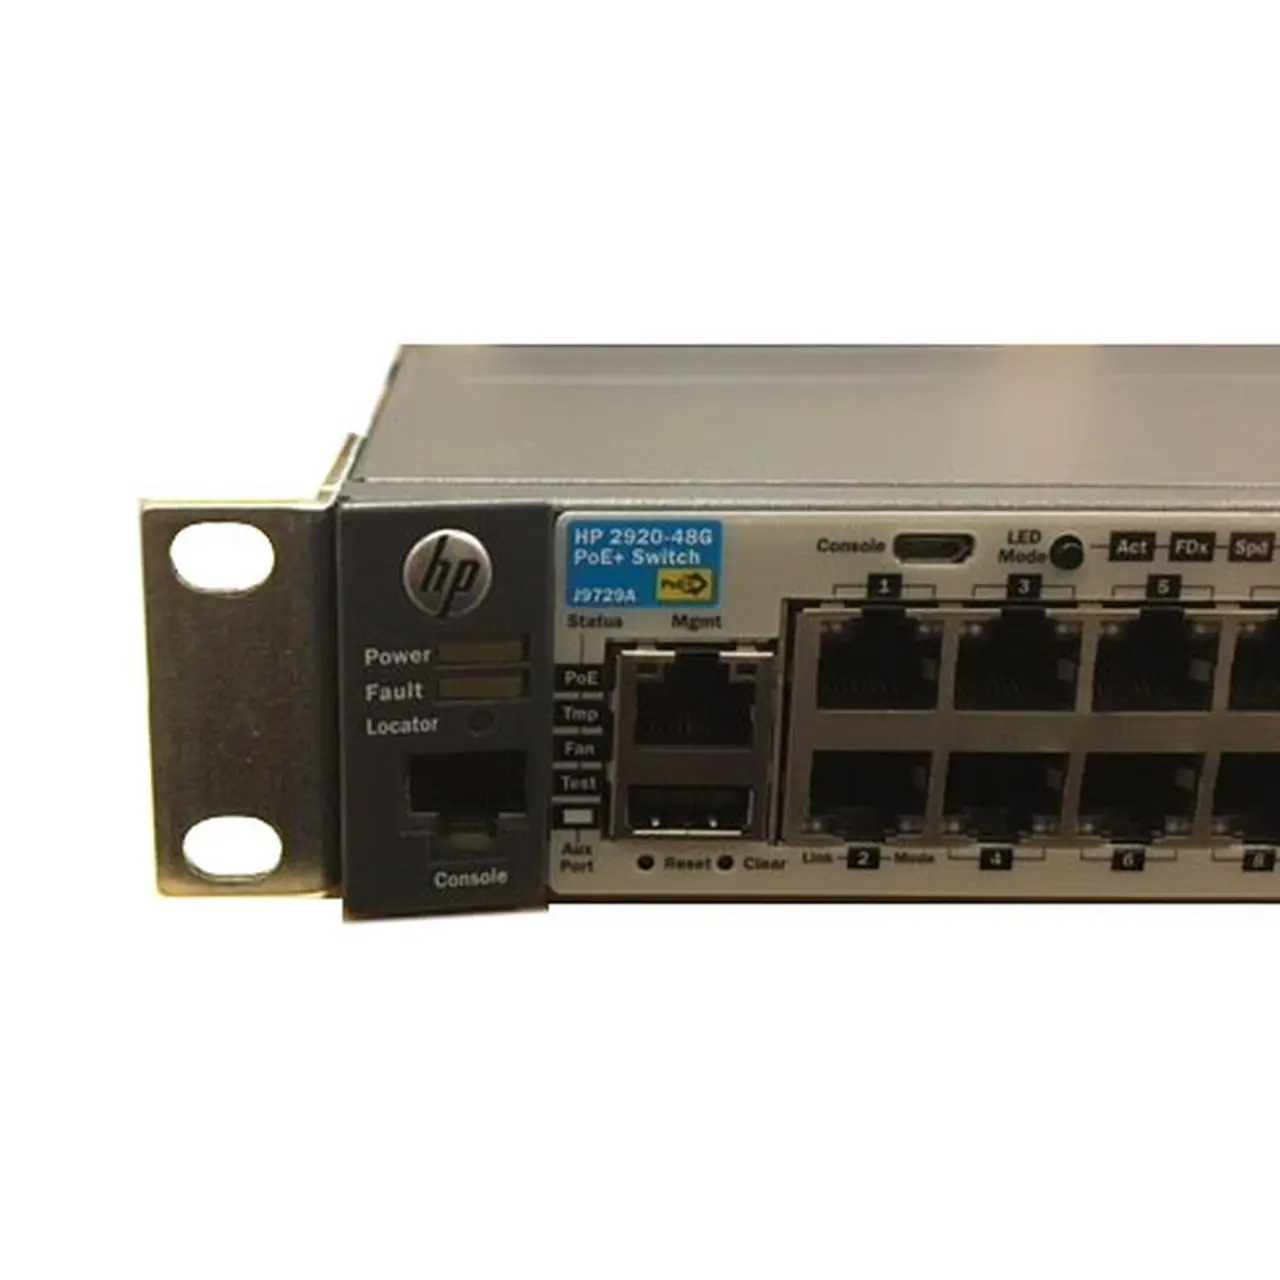 hewlett-packard hp 2920-48g-poe+ 370w - What is the baud rate of the HP 2920 console